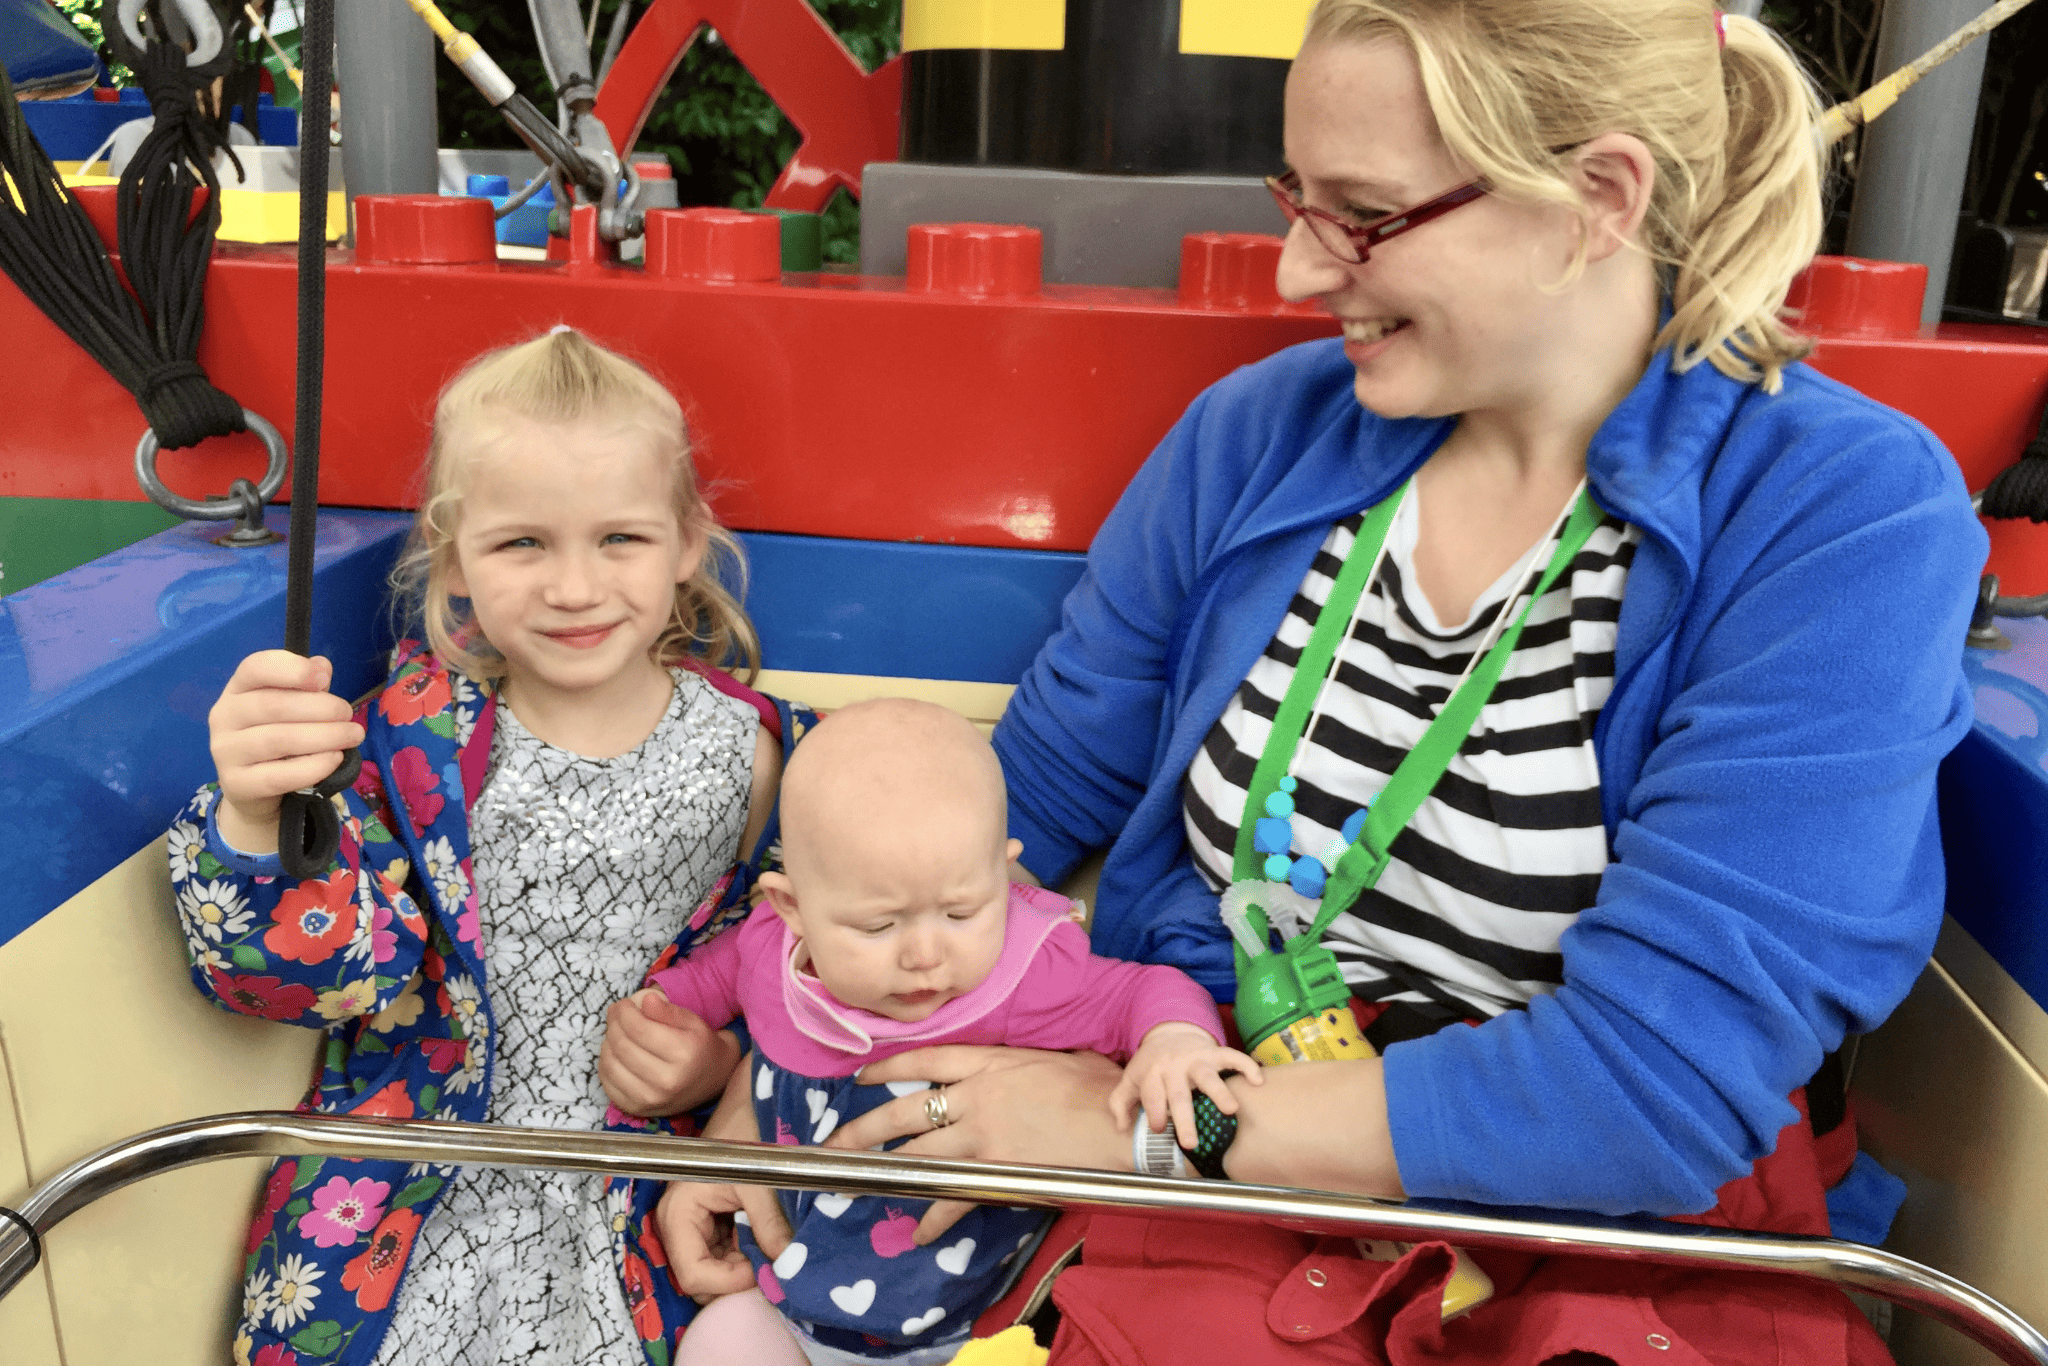 Legoland With A Baby: Tips For A Stress-Free Visit